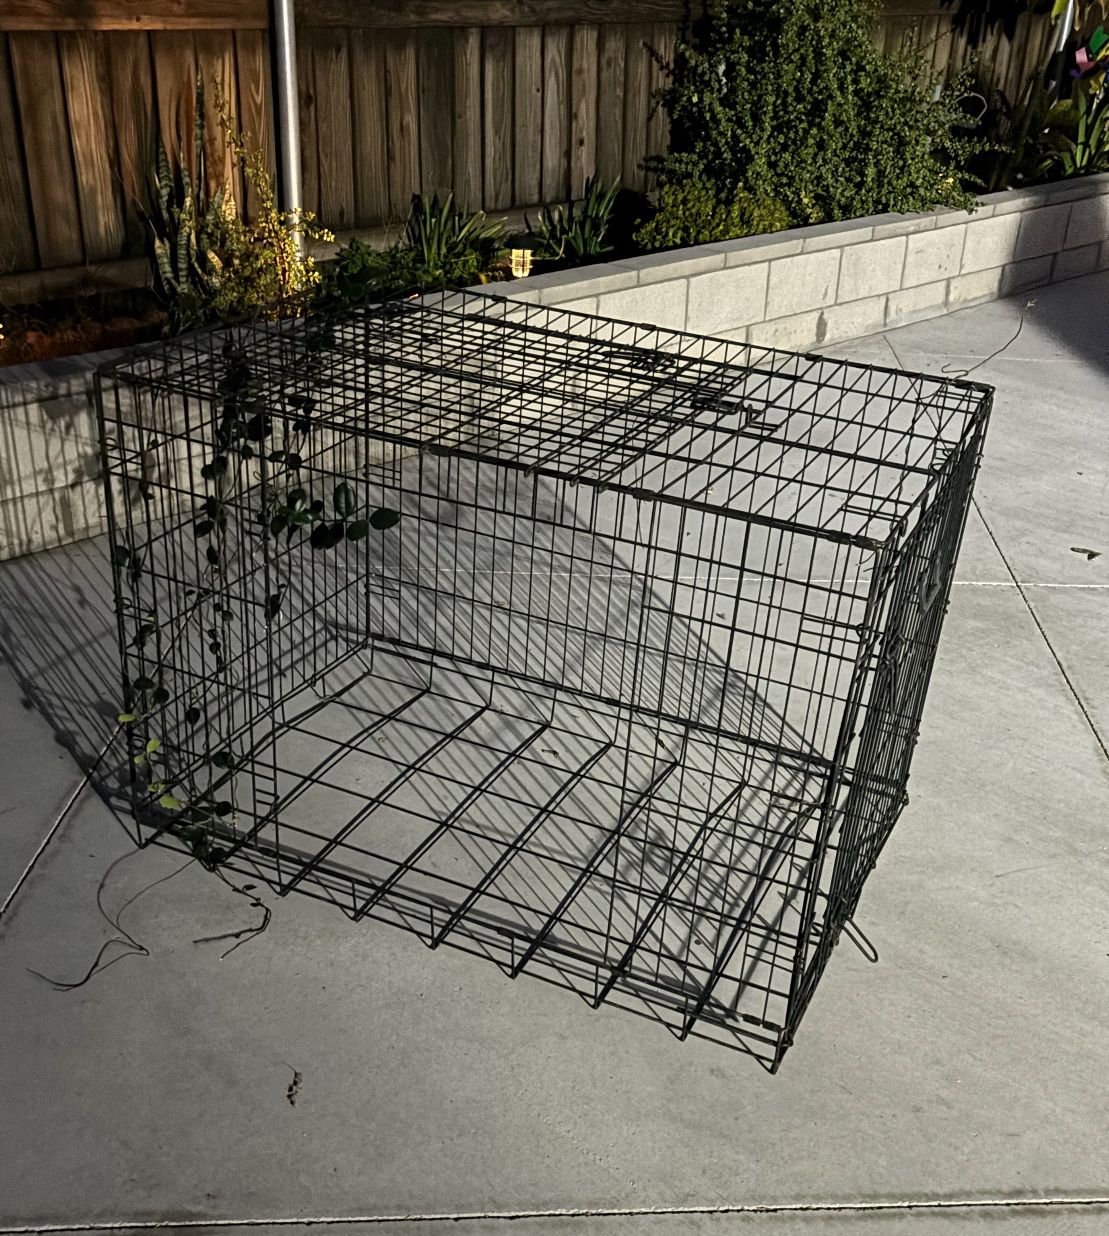 Extra Large Dog Cage Kennel 